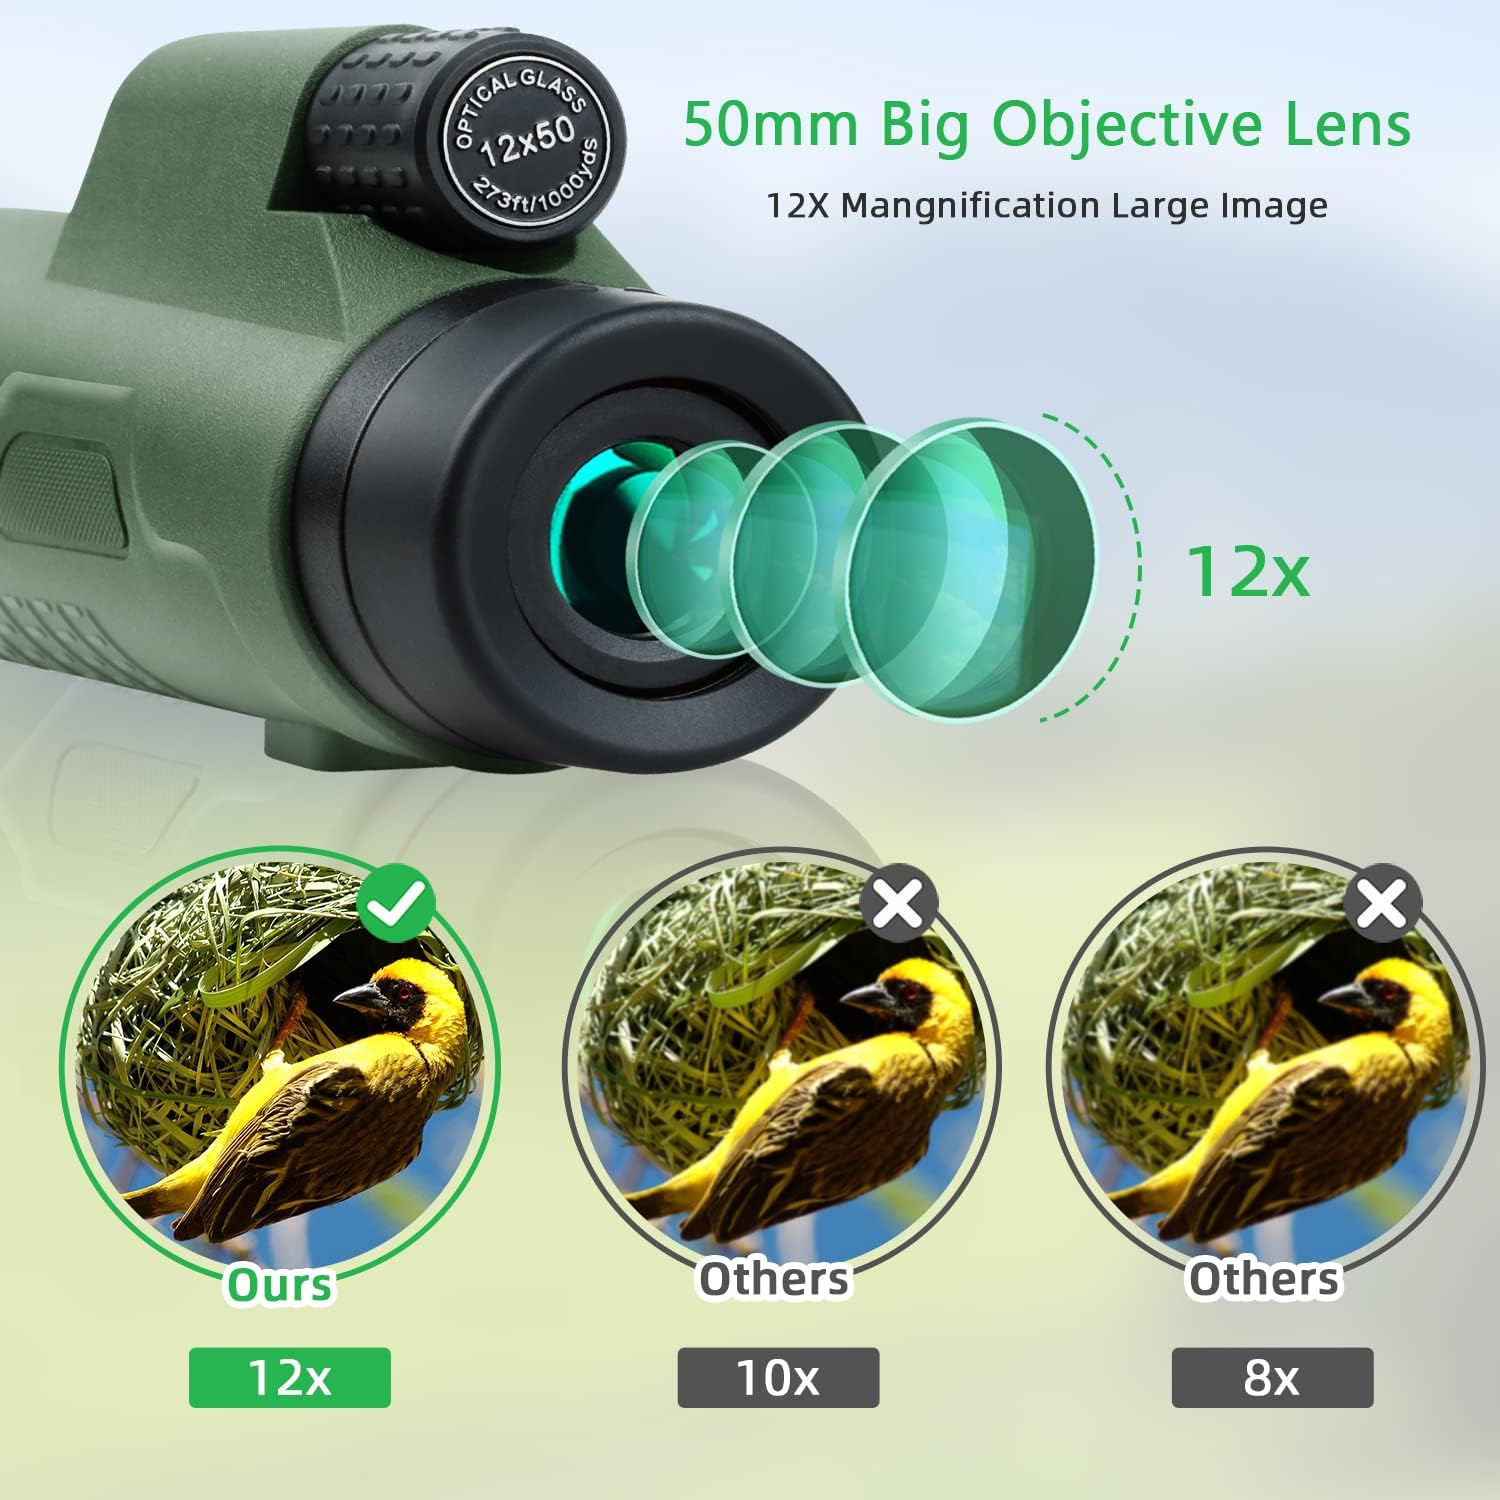 12x50 HD Monocular Telescope for Adults with Smartphone Adapter Tripod Hand Strap - High Power Monoculars Equipped with Large BAK4 Prism  FMC Lens - Suitable for Bird Watching Sports Hiking Traveling